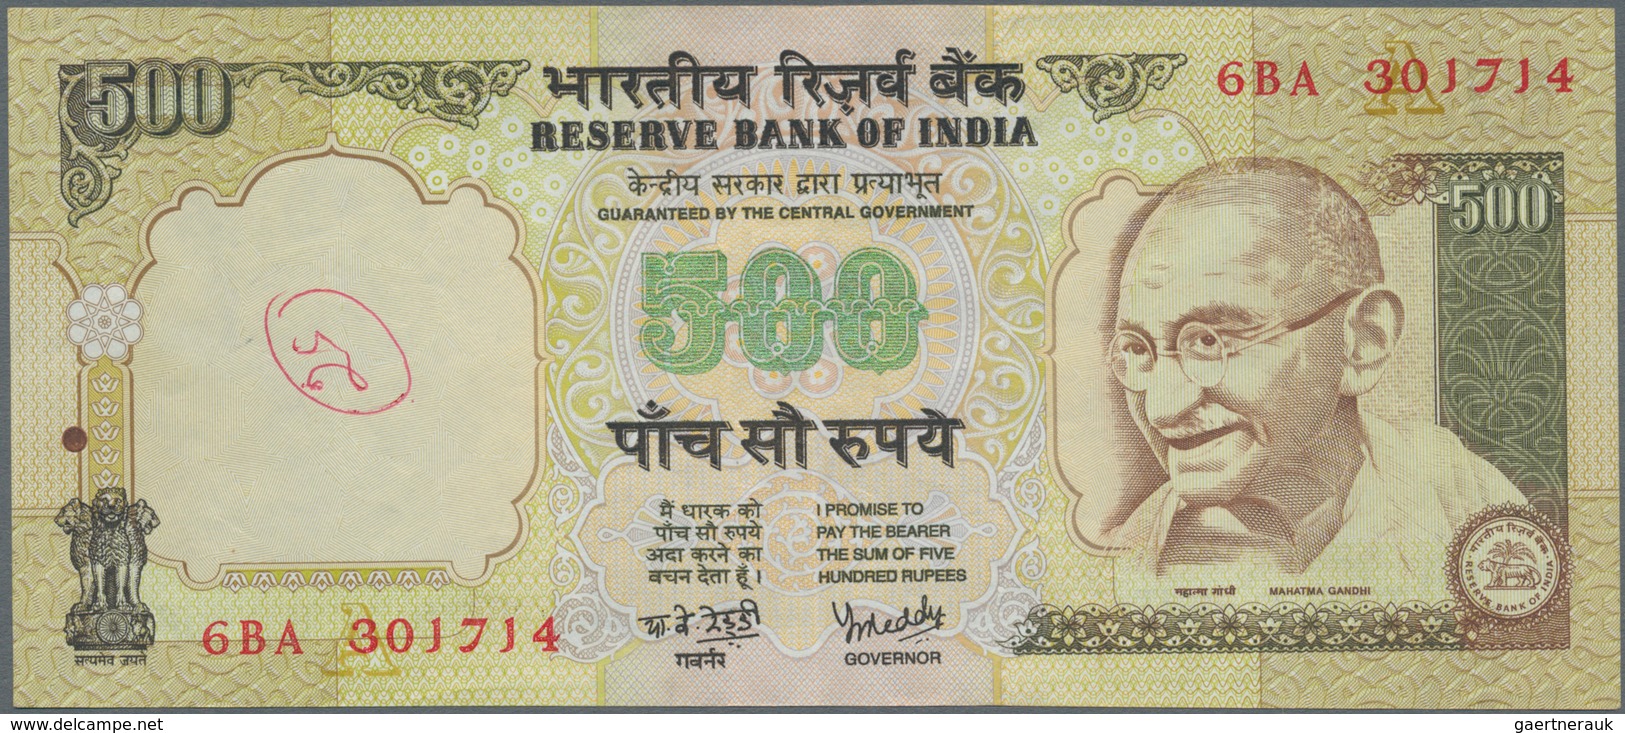 India / Indien: 500 Rupees ND P. 93 Error Note With Inverted Watermark In Paper, Light Handling In P - India